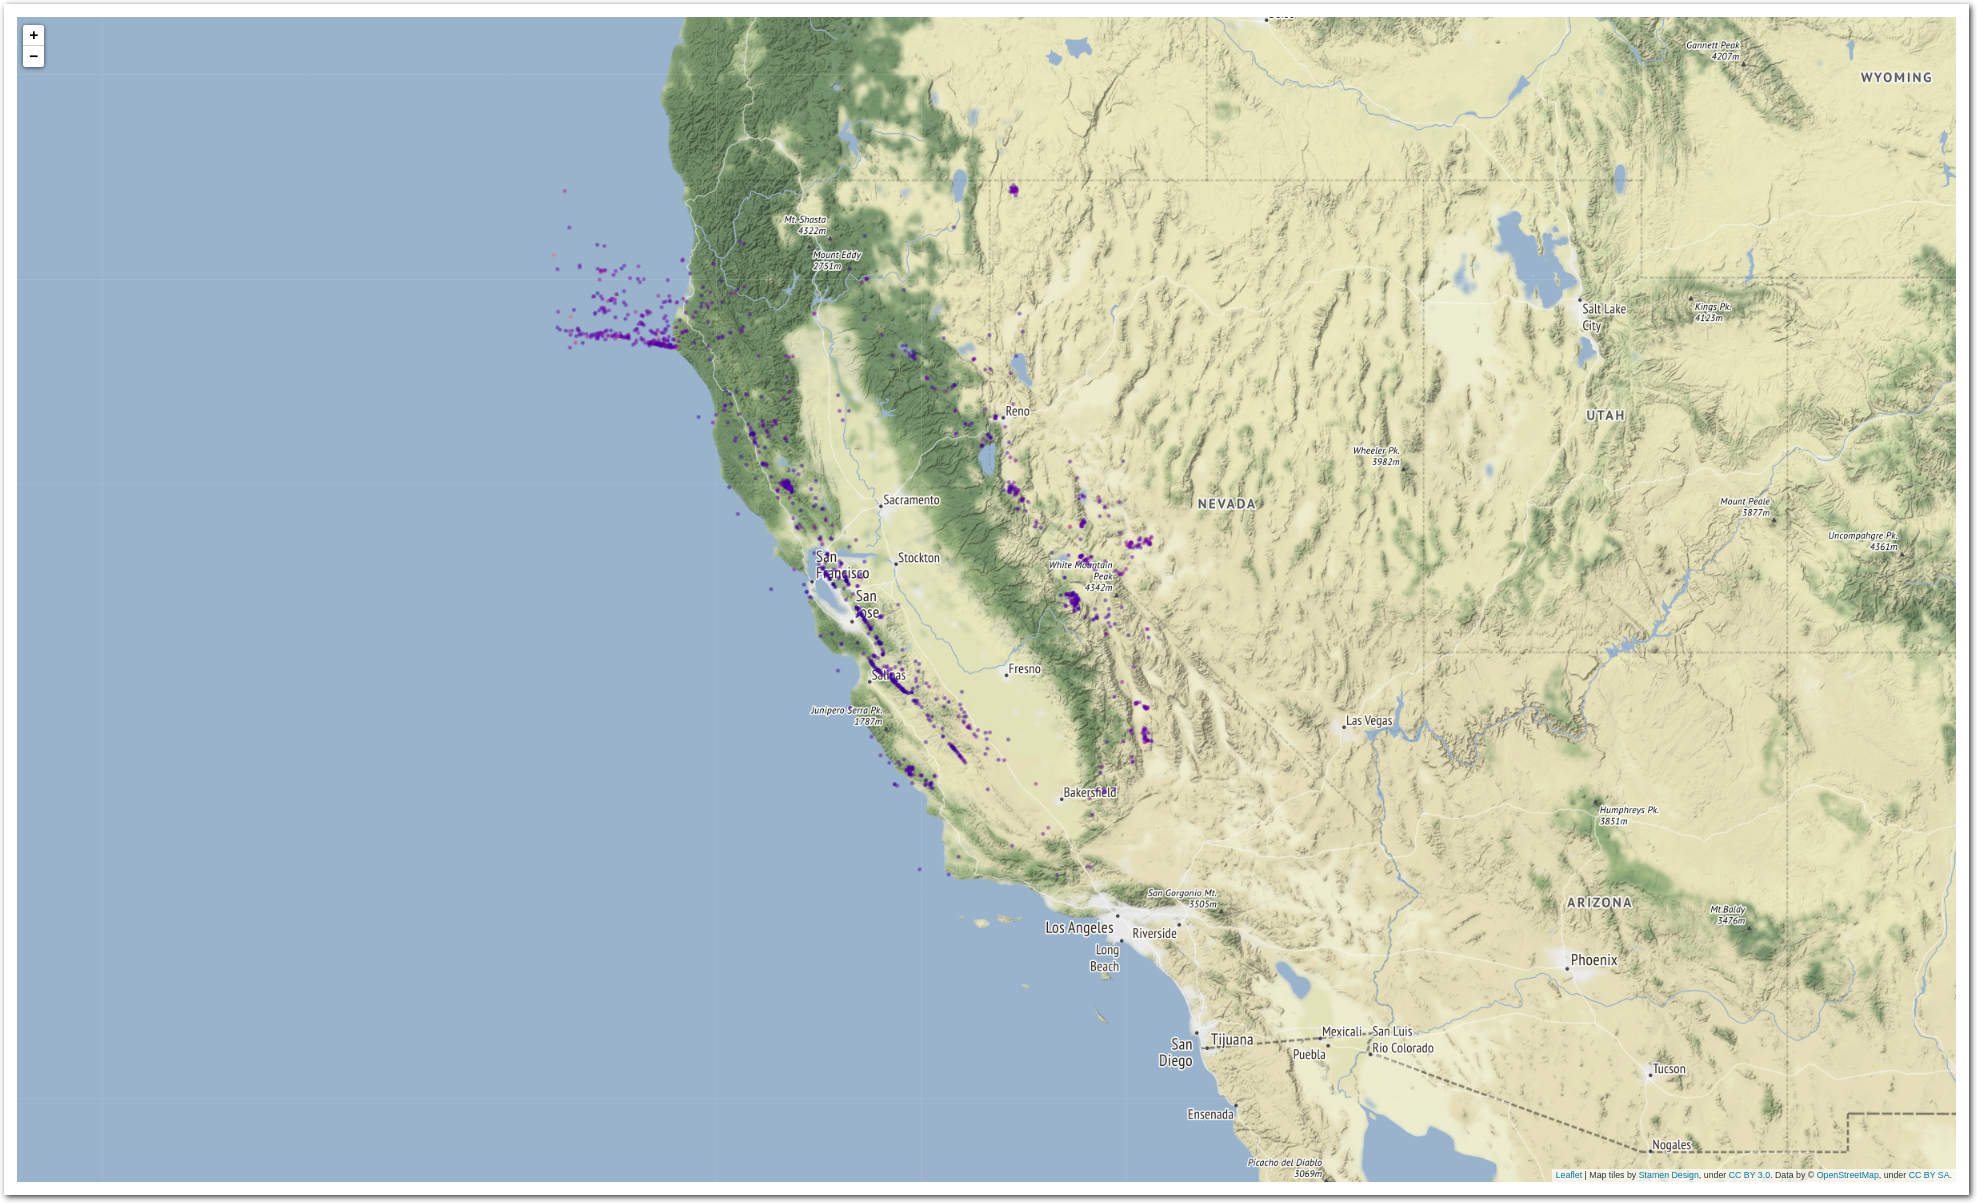 Earthquakes in CA - NCEDC 1992-2021 (Mw scale).